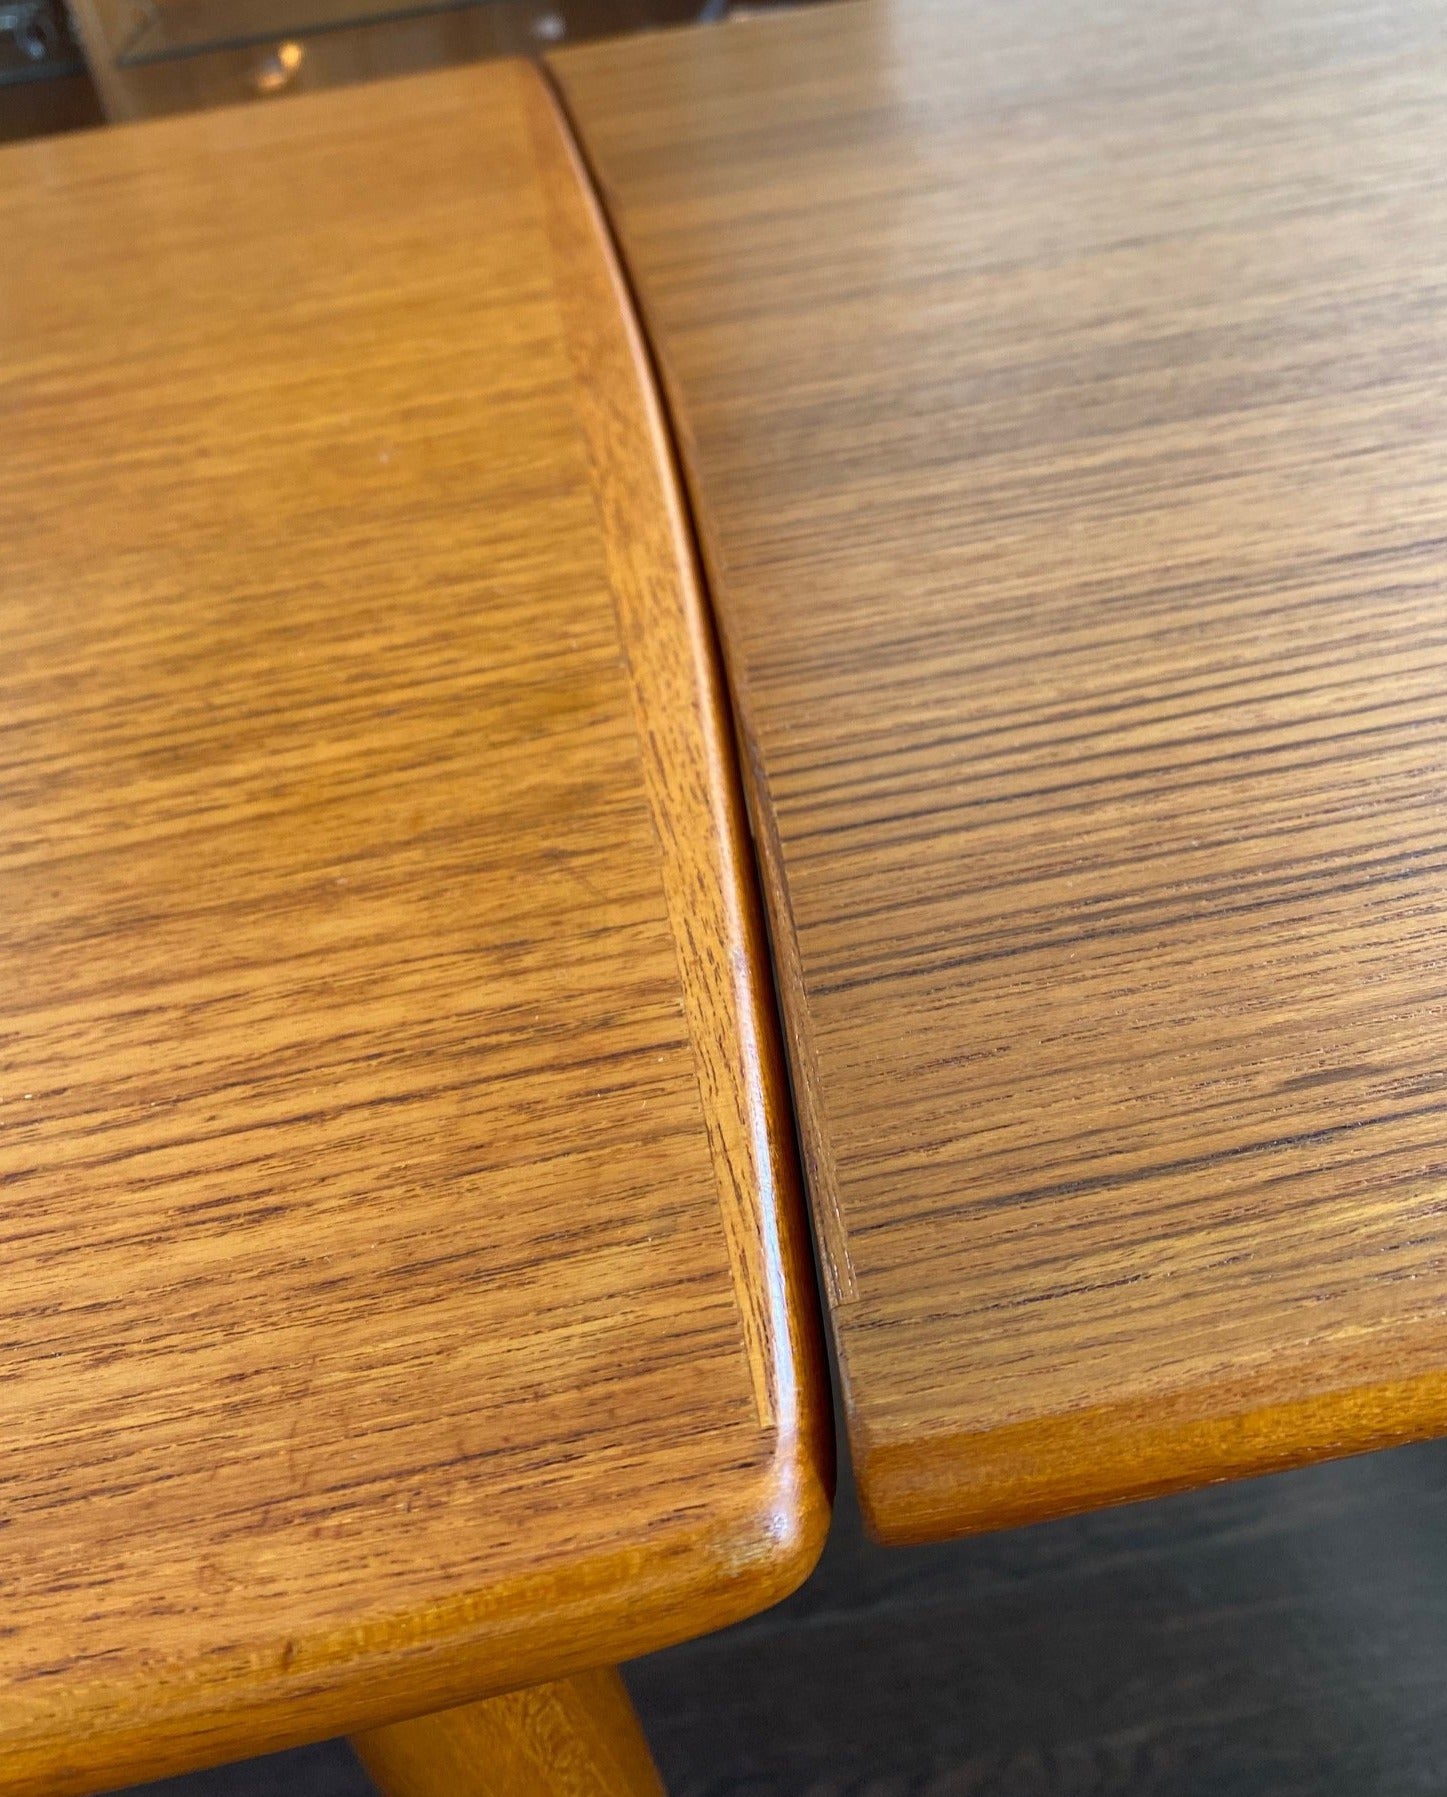 Vintage Teak Dining Table with Soft curved edge of Draw Leaf Extension - Cook Street Vintage